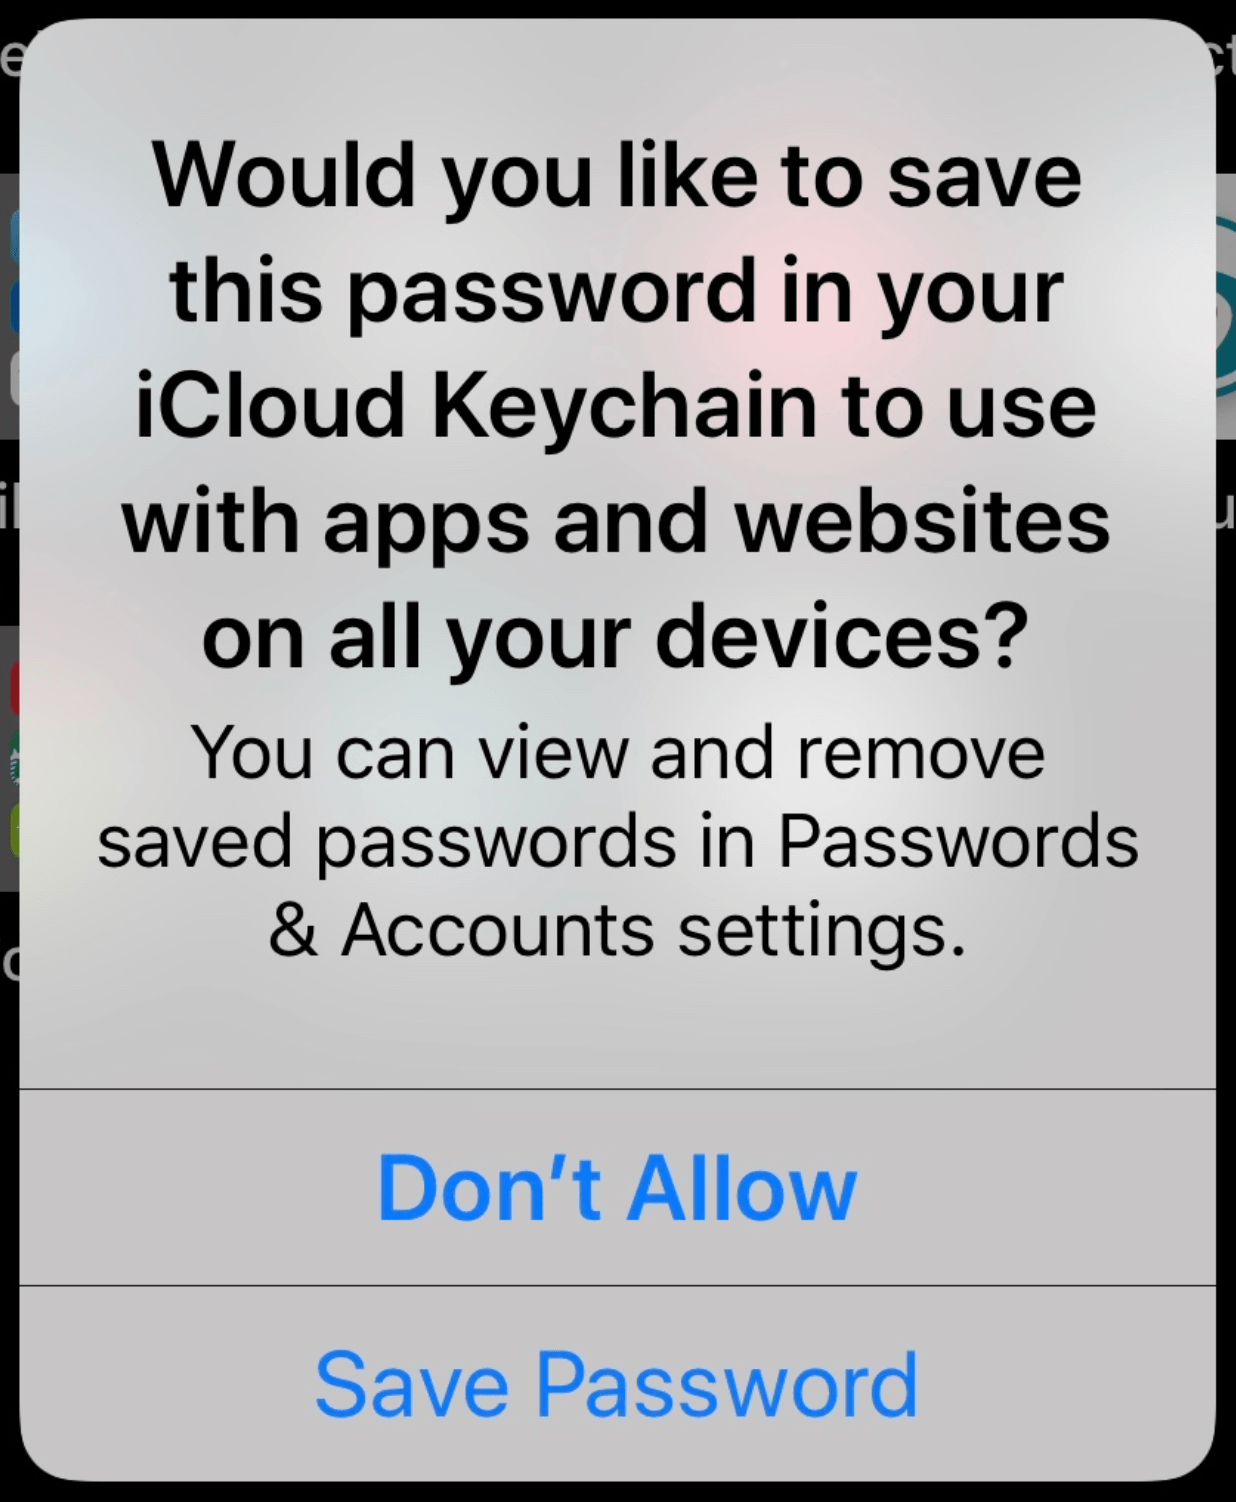 would you like to save this password in your iCloud Keychain to use with apps and websites on all your devices?